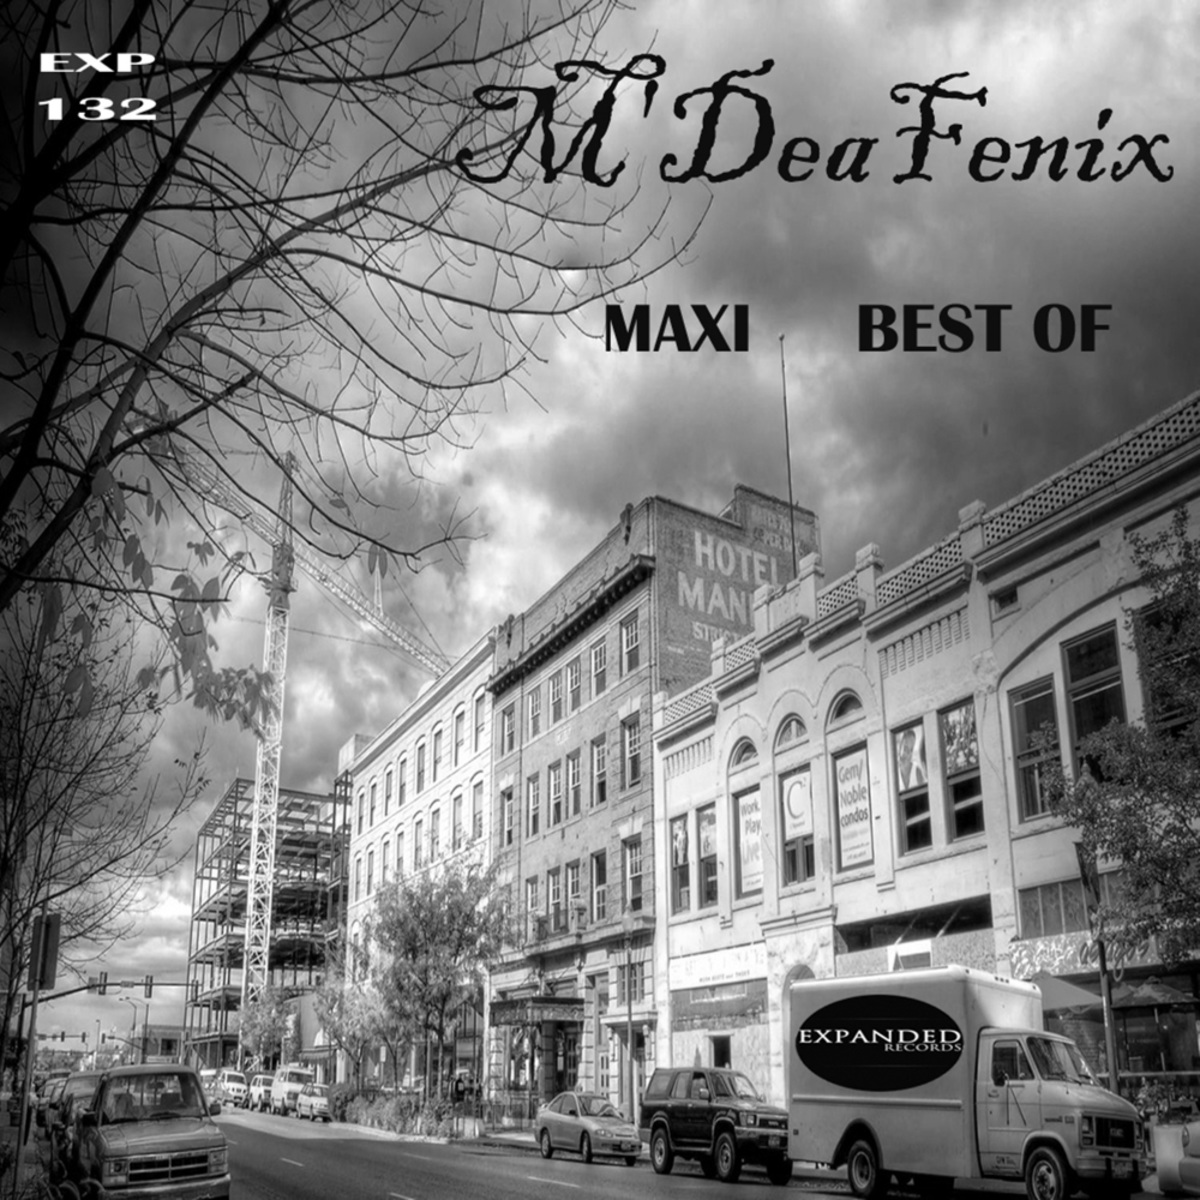 M'DeaFenix - Maxi: Best Of / Expanded Records